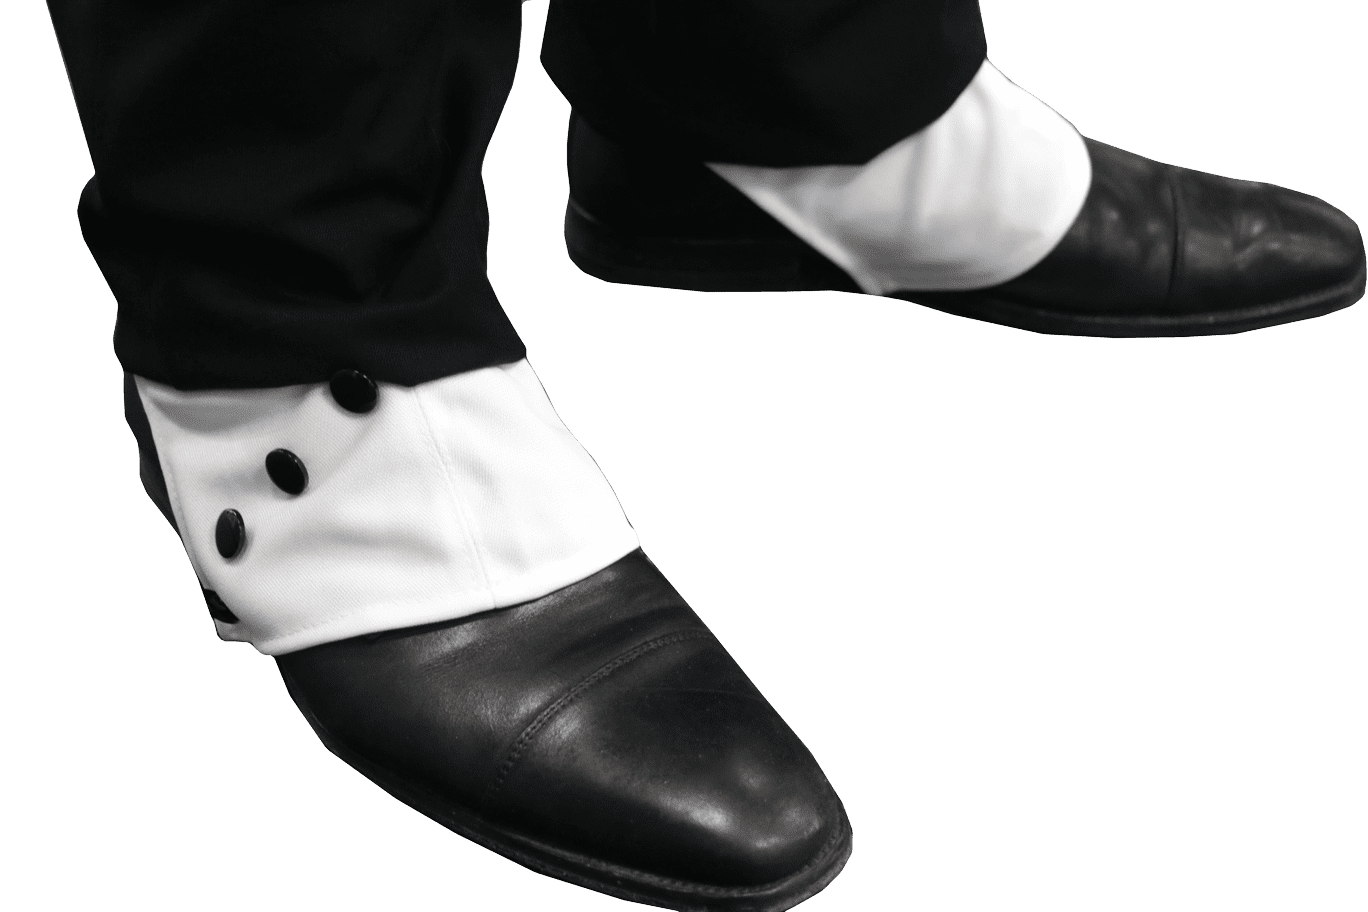 Featured image for “1920s Deluxe Gangster Shoe Spats”